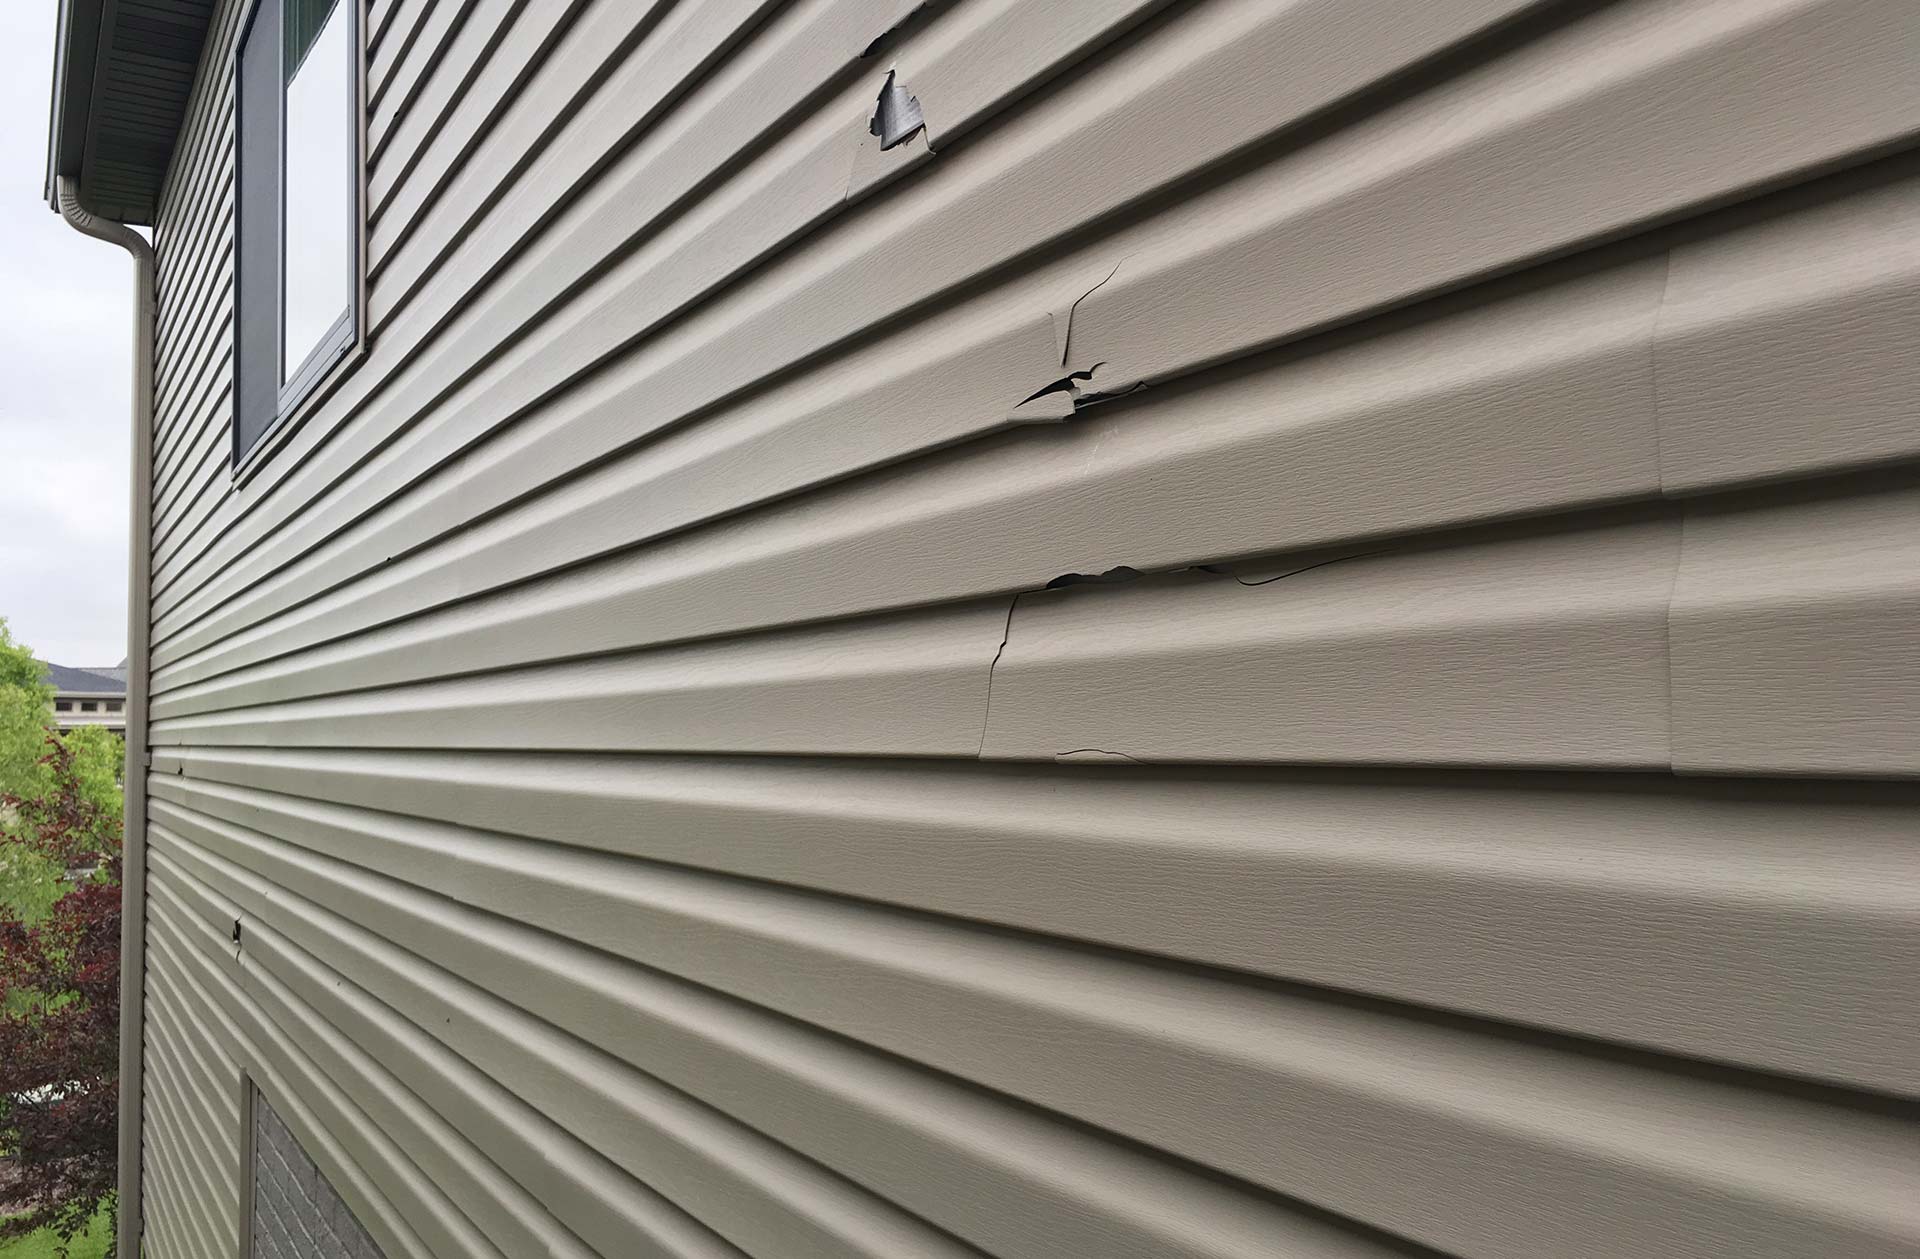 Cracked vinyl siding as a result of hail damage. 